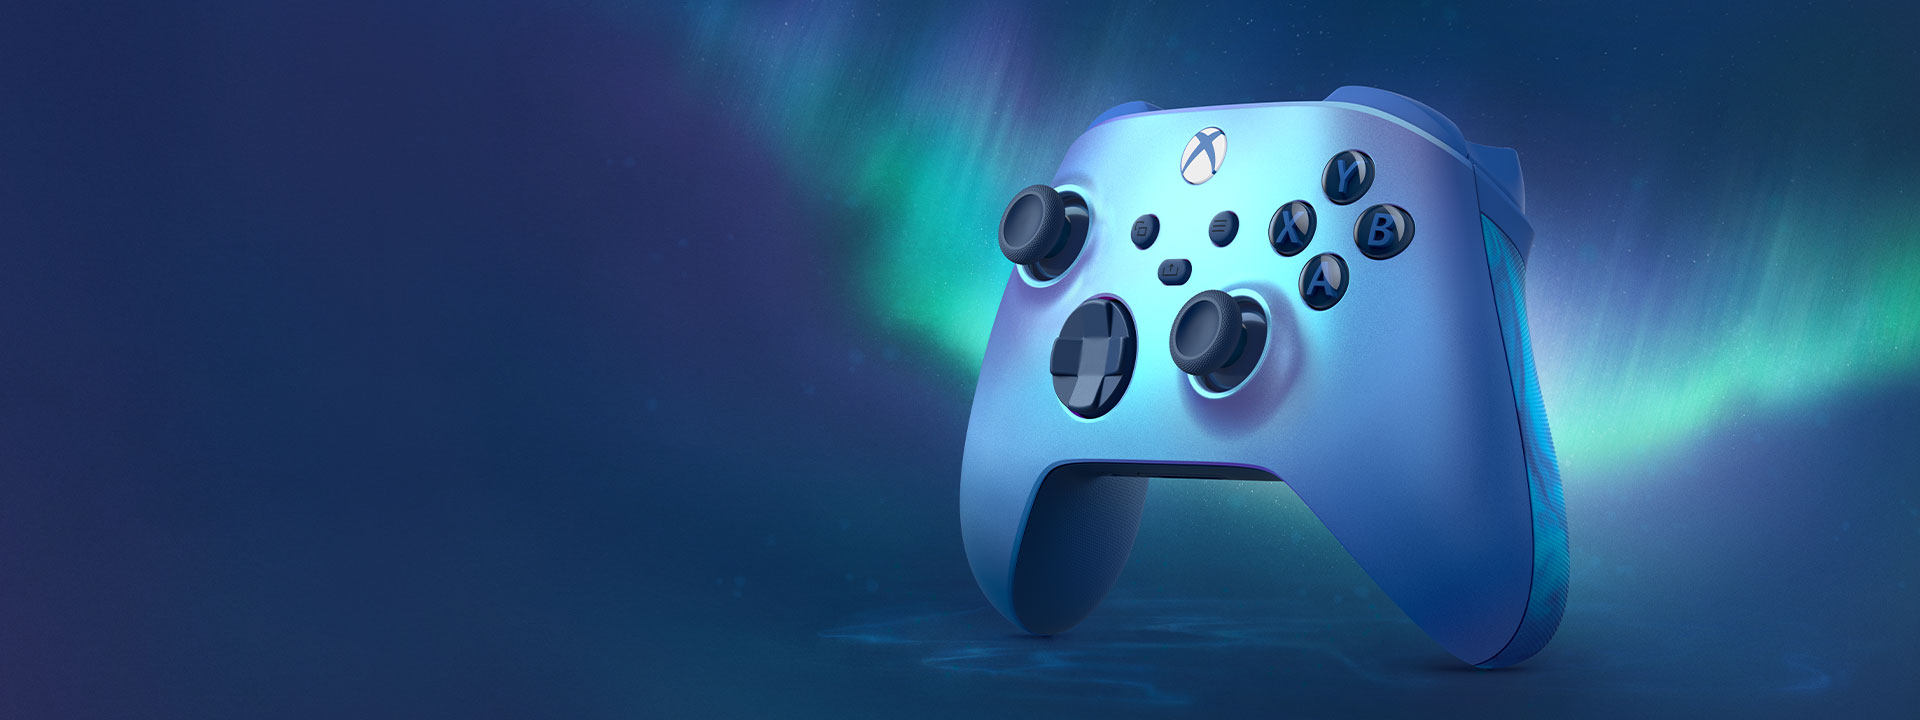 Xbox Wireless Controller – Aqua Shift Special Edition in front of northern lights